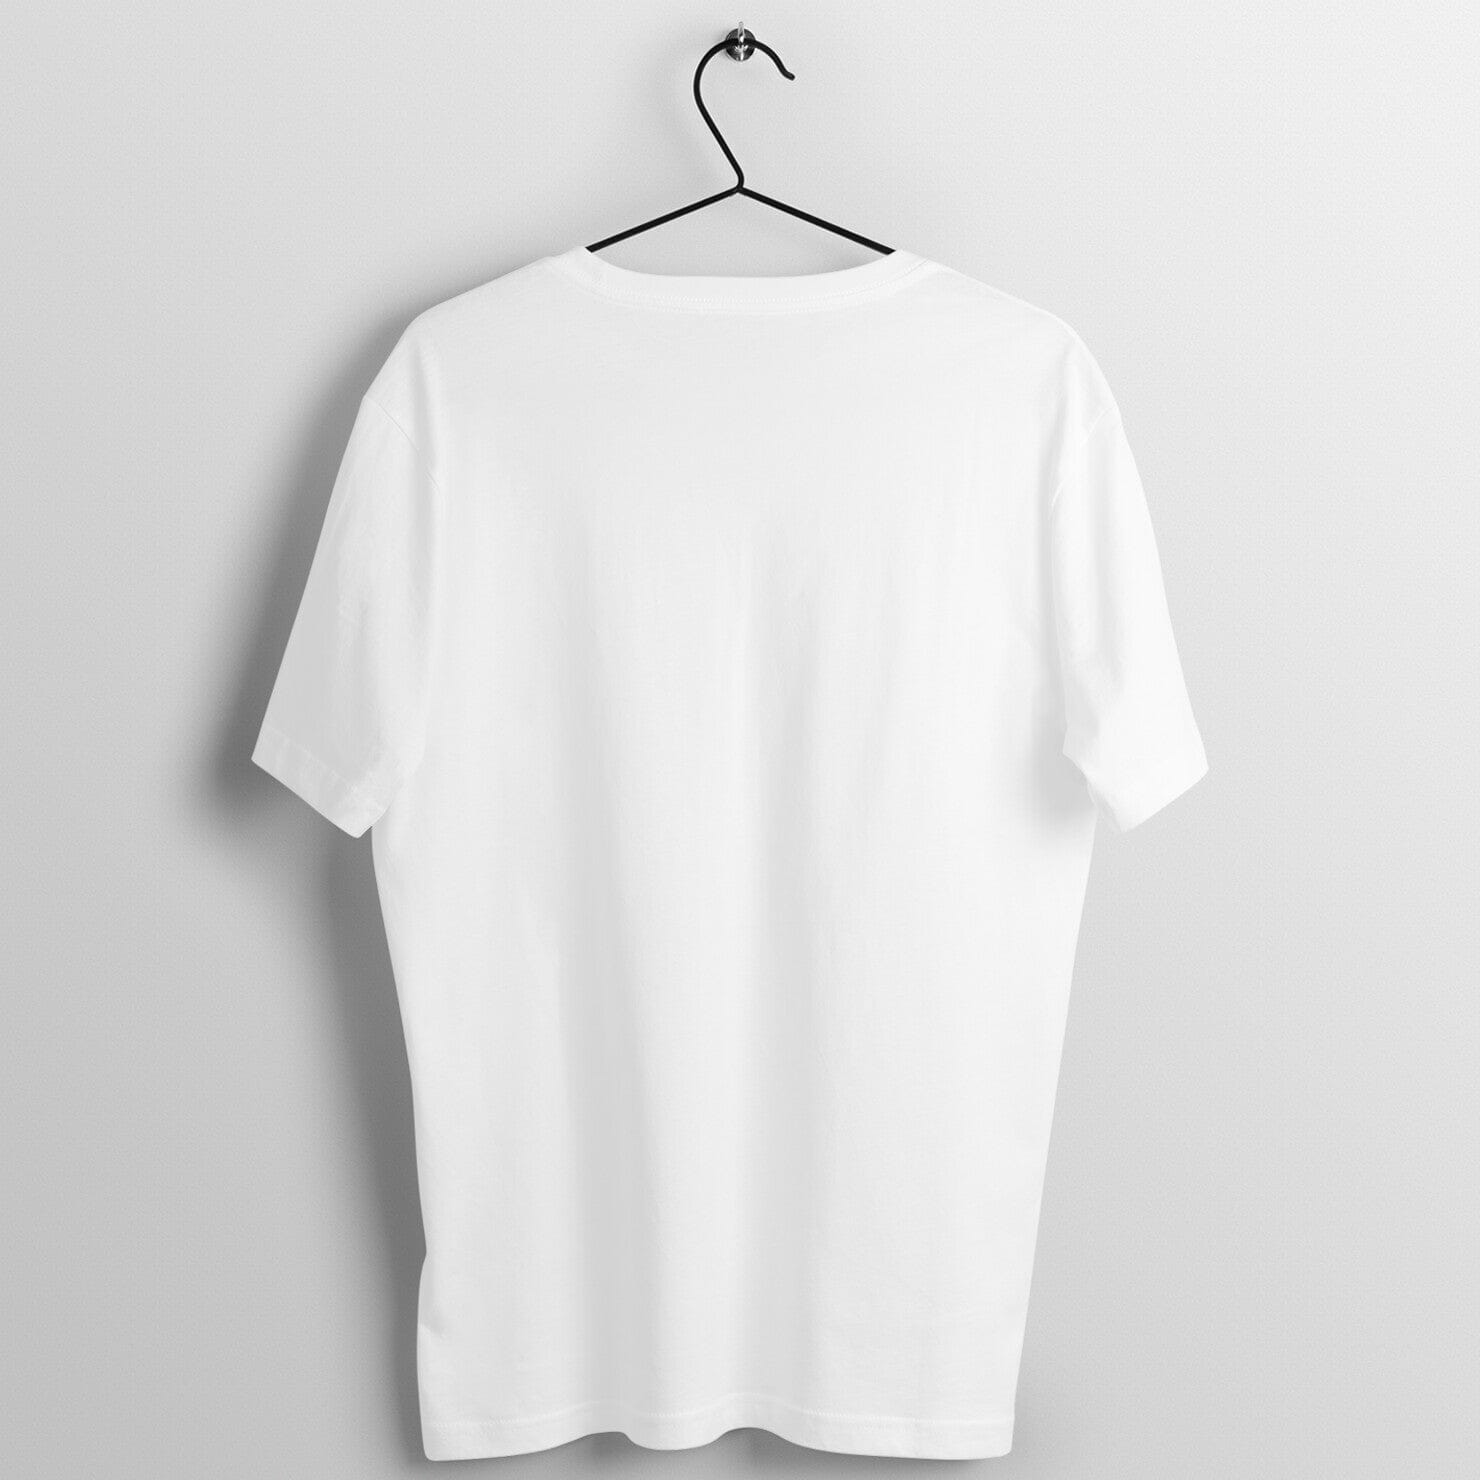 Number 69 Exclusive White T Shirt for Men and Women Printrove 